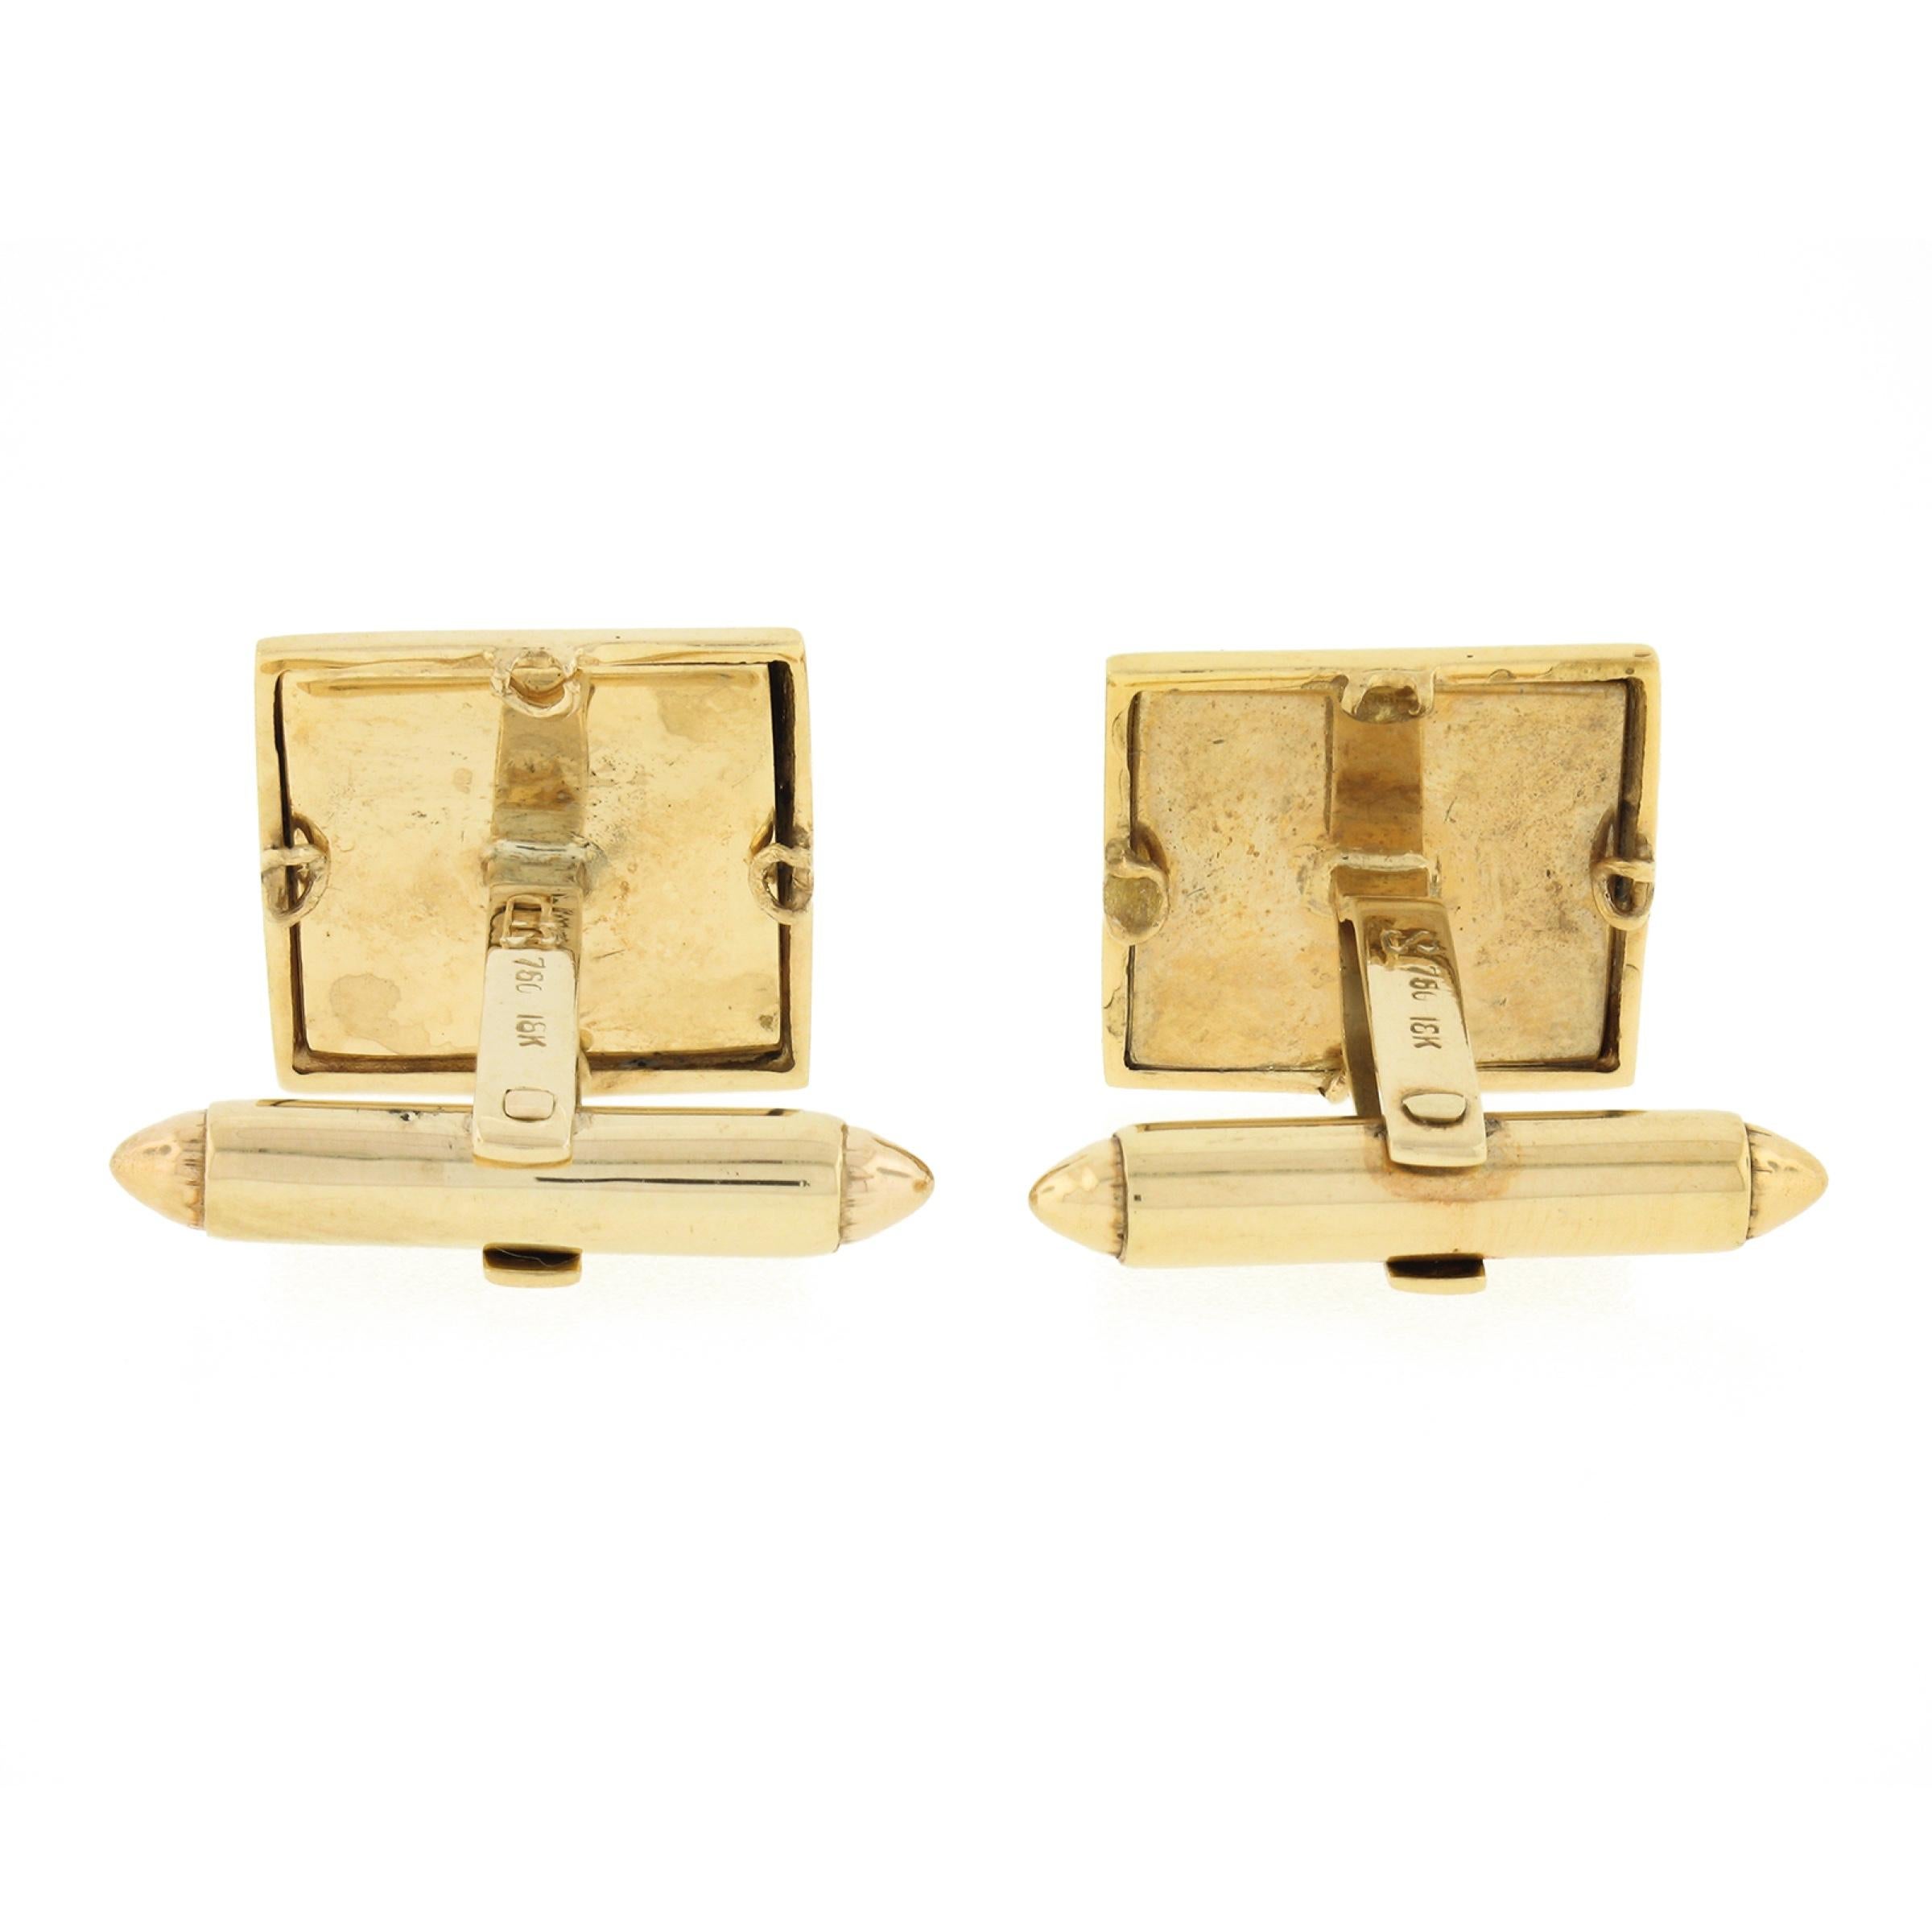 These sharp vintage cuff links are crafted in solid 18k yellow gold and feature a square shaped design which carries a fine black onyx stone at its center. Each of the polished gemstones has a wonderful pyramid cut and perfectly set and framed by